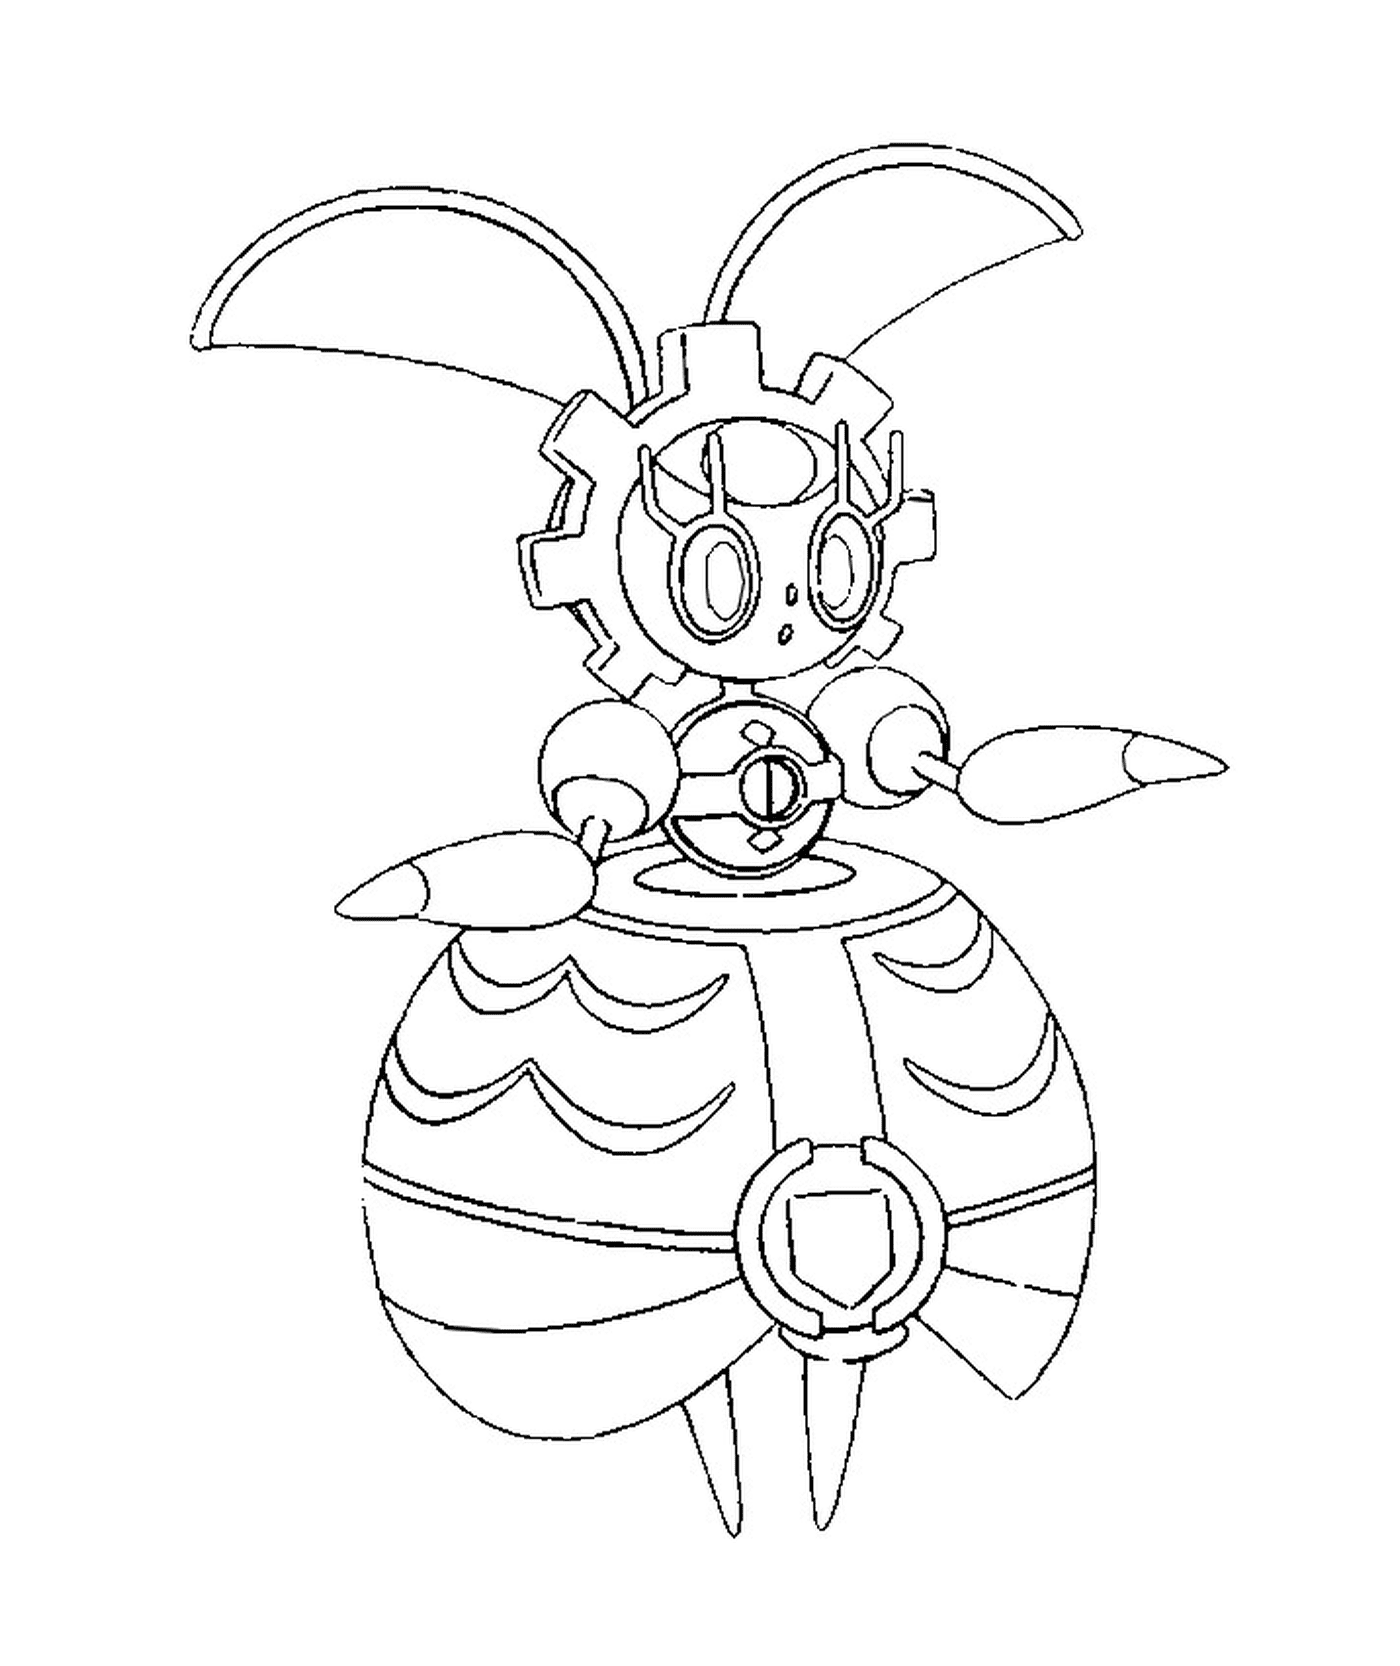  Magearna, an insect 